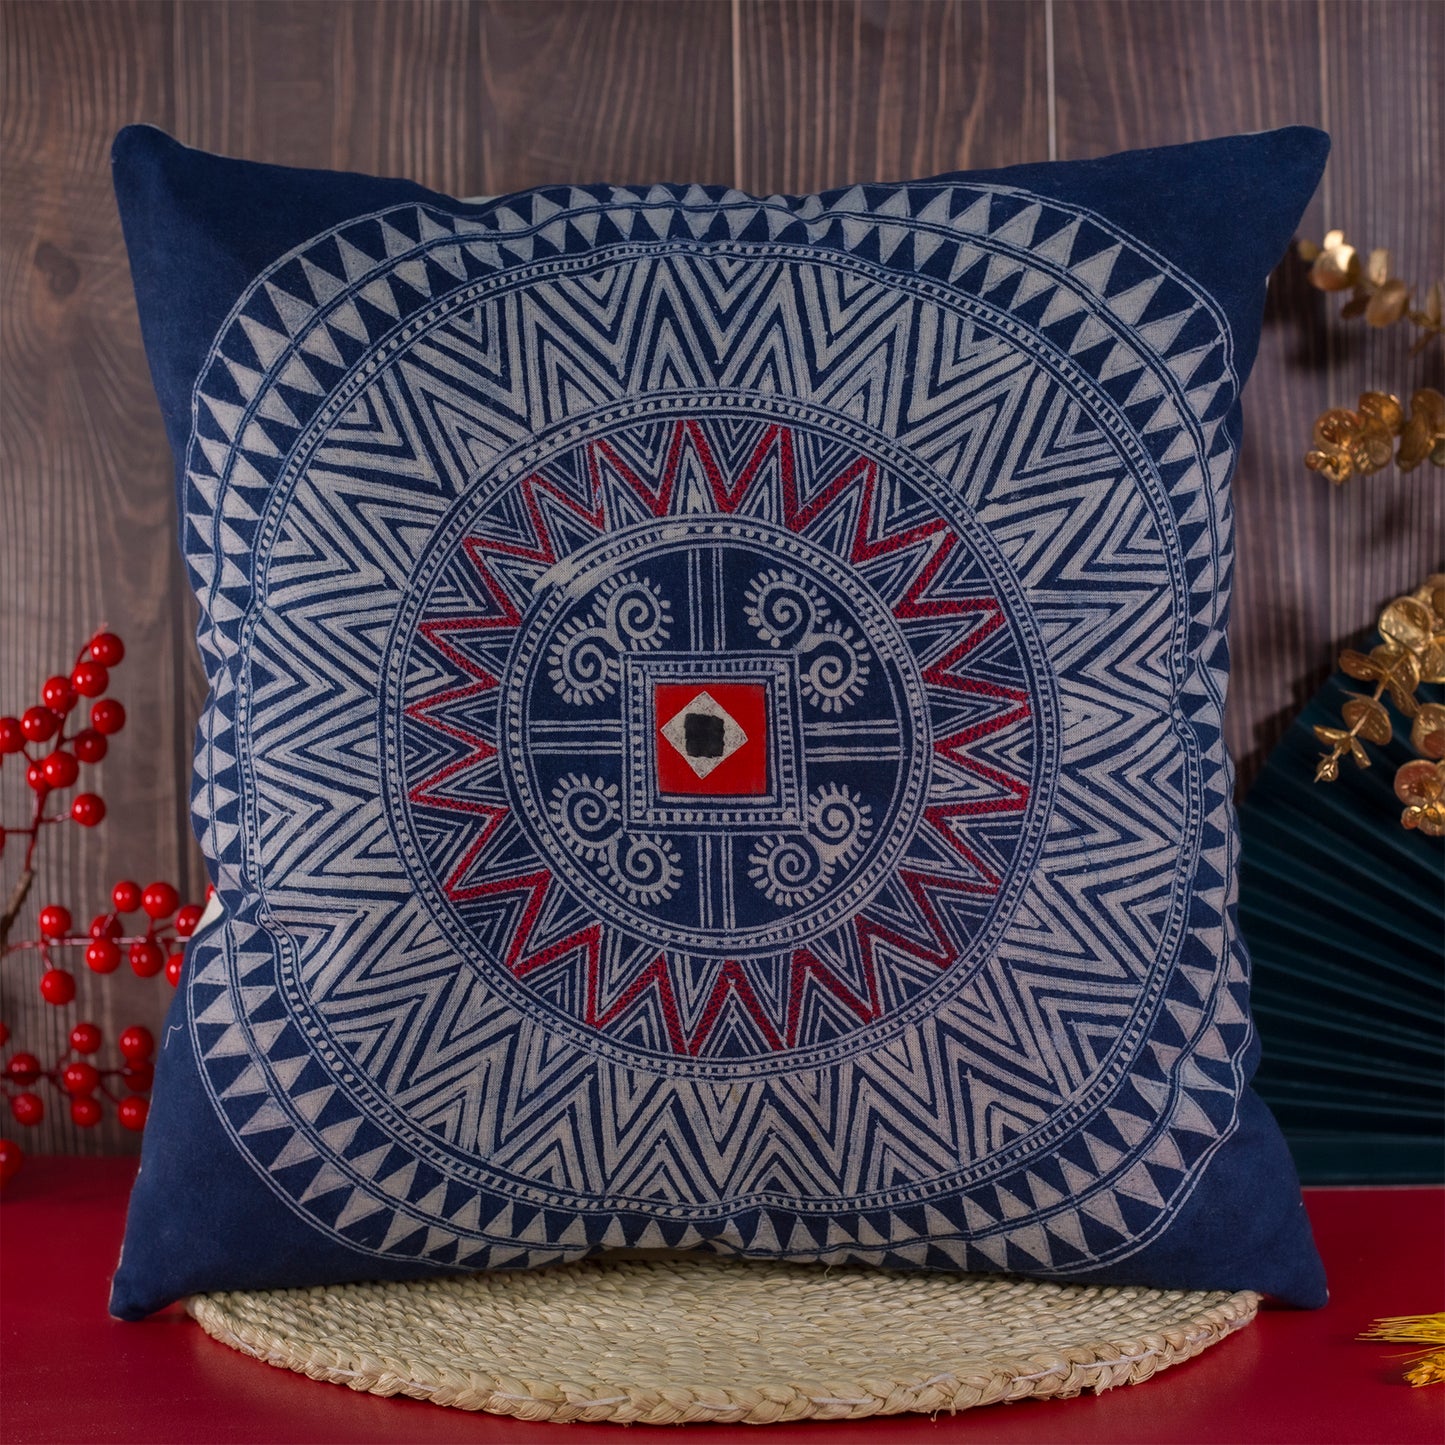 Batik Cushion Cover - H'mong pattern, hand-stitched fabric patch